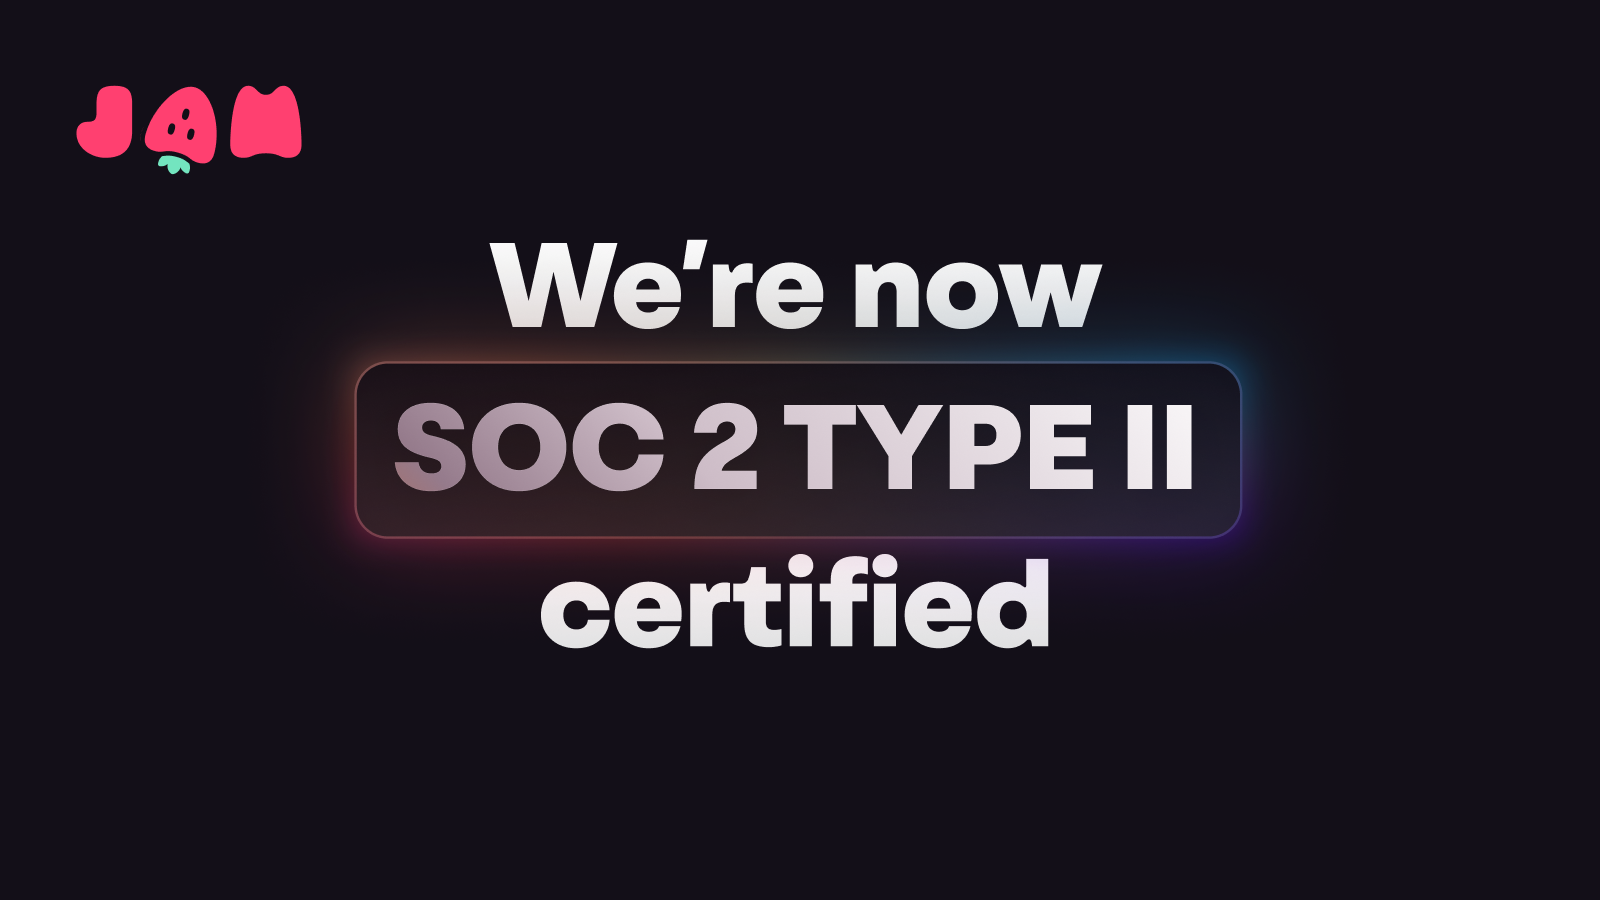 Announcing: Jam has achieved SOC 2 Type II compliance